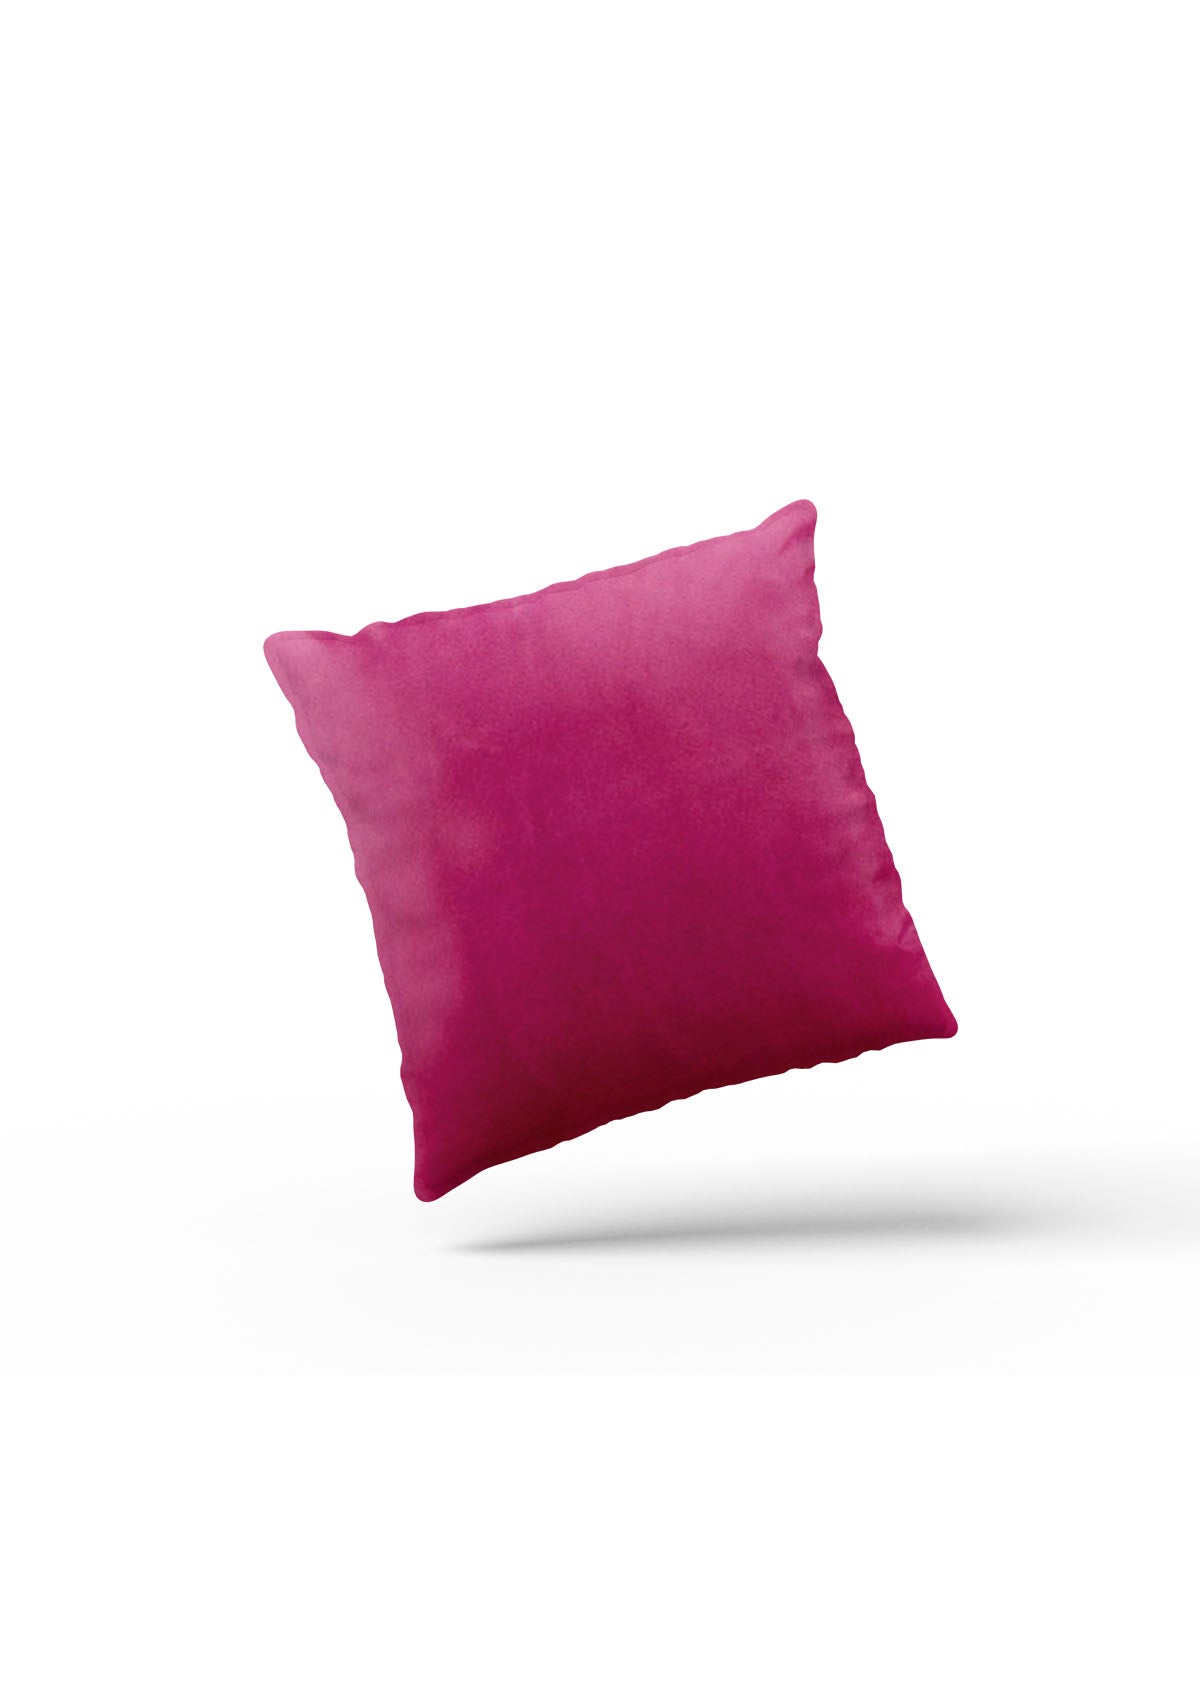 Hot Pink Velvet Cushion Covers | CovermyCushion